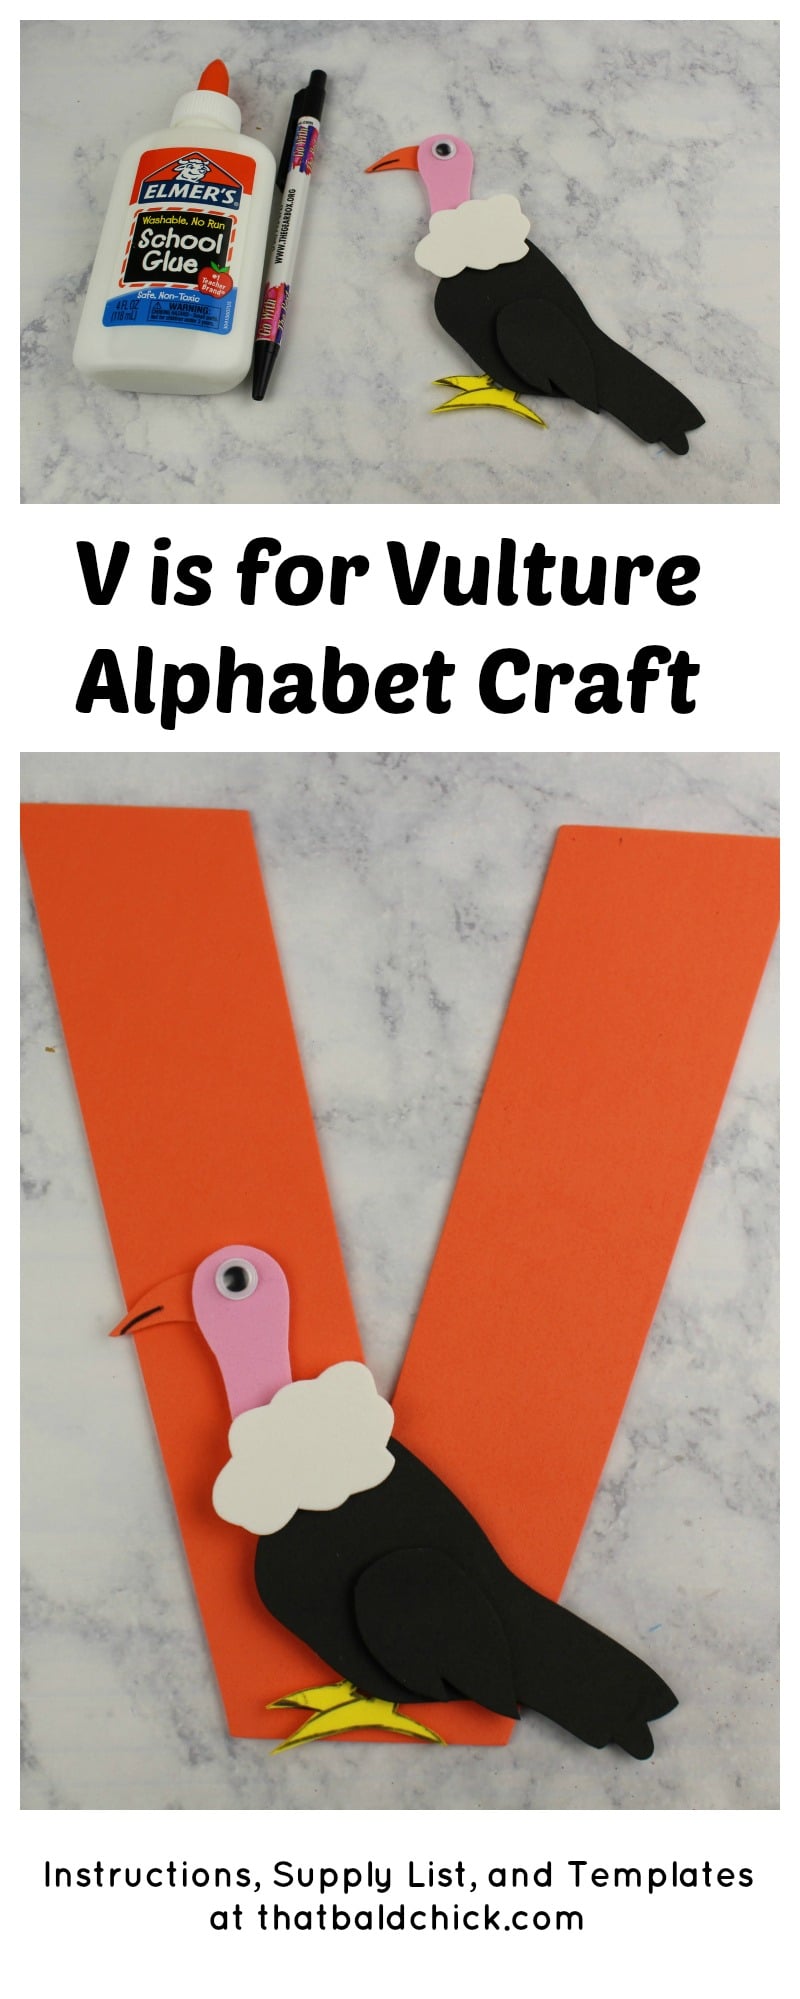 Get the supply list, instructions, and templates for this V is for Vulture Alphabet Craft today! #homeschool #teacher #alphabet #abcs #lotw #free #printable